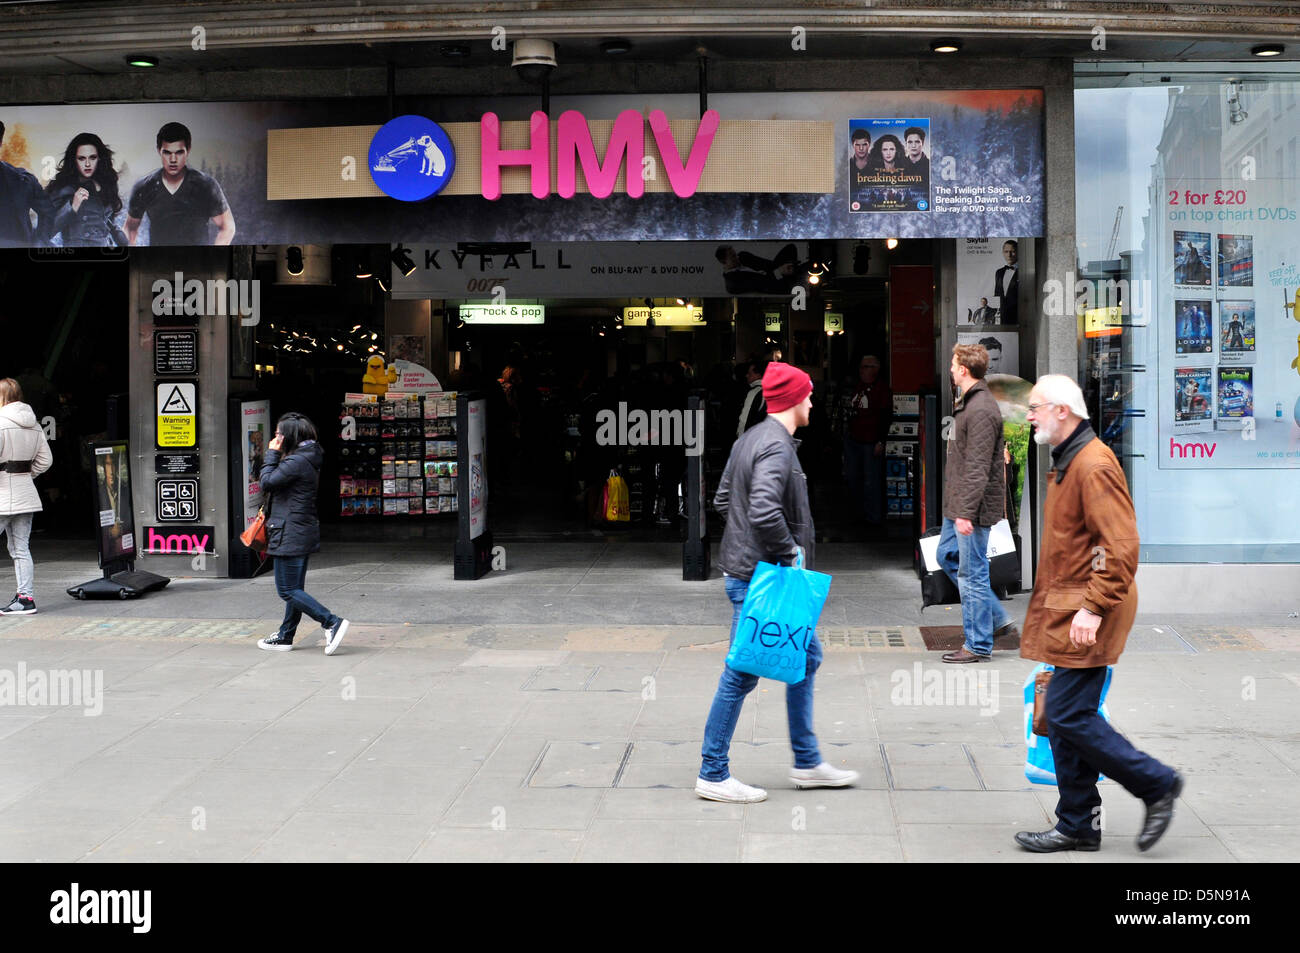 A view of  an HMV store in Oxford Street, London, UK. Stock Photo